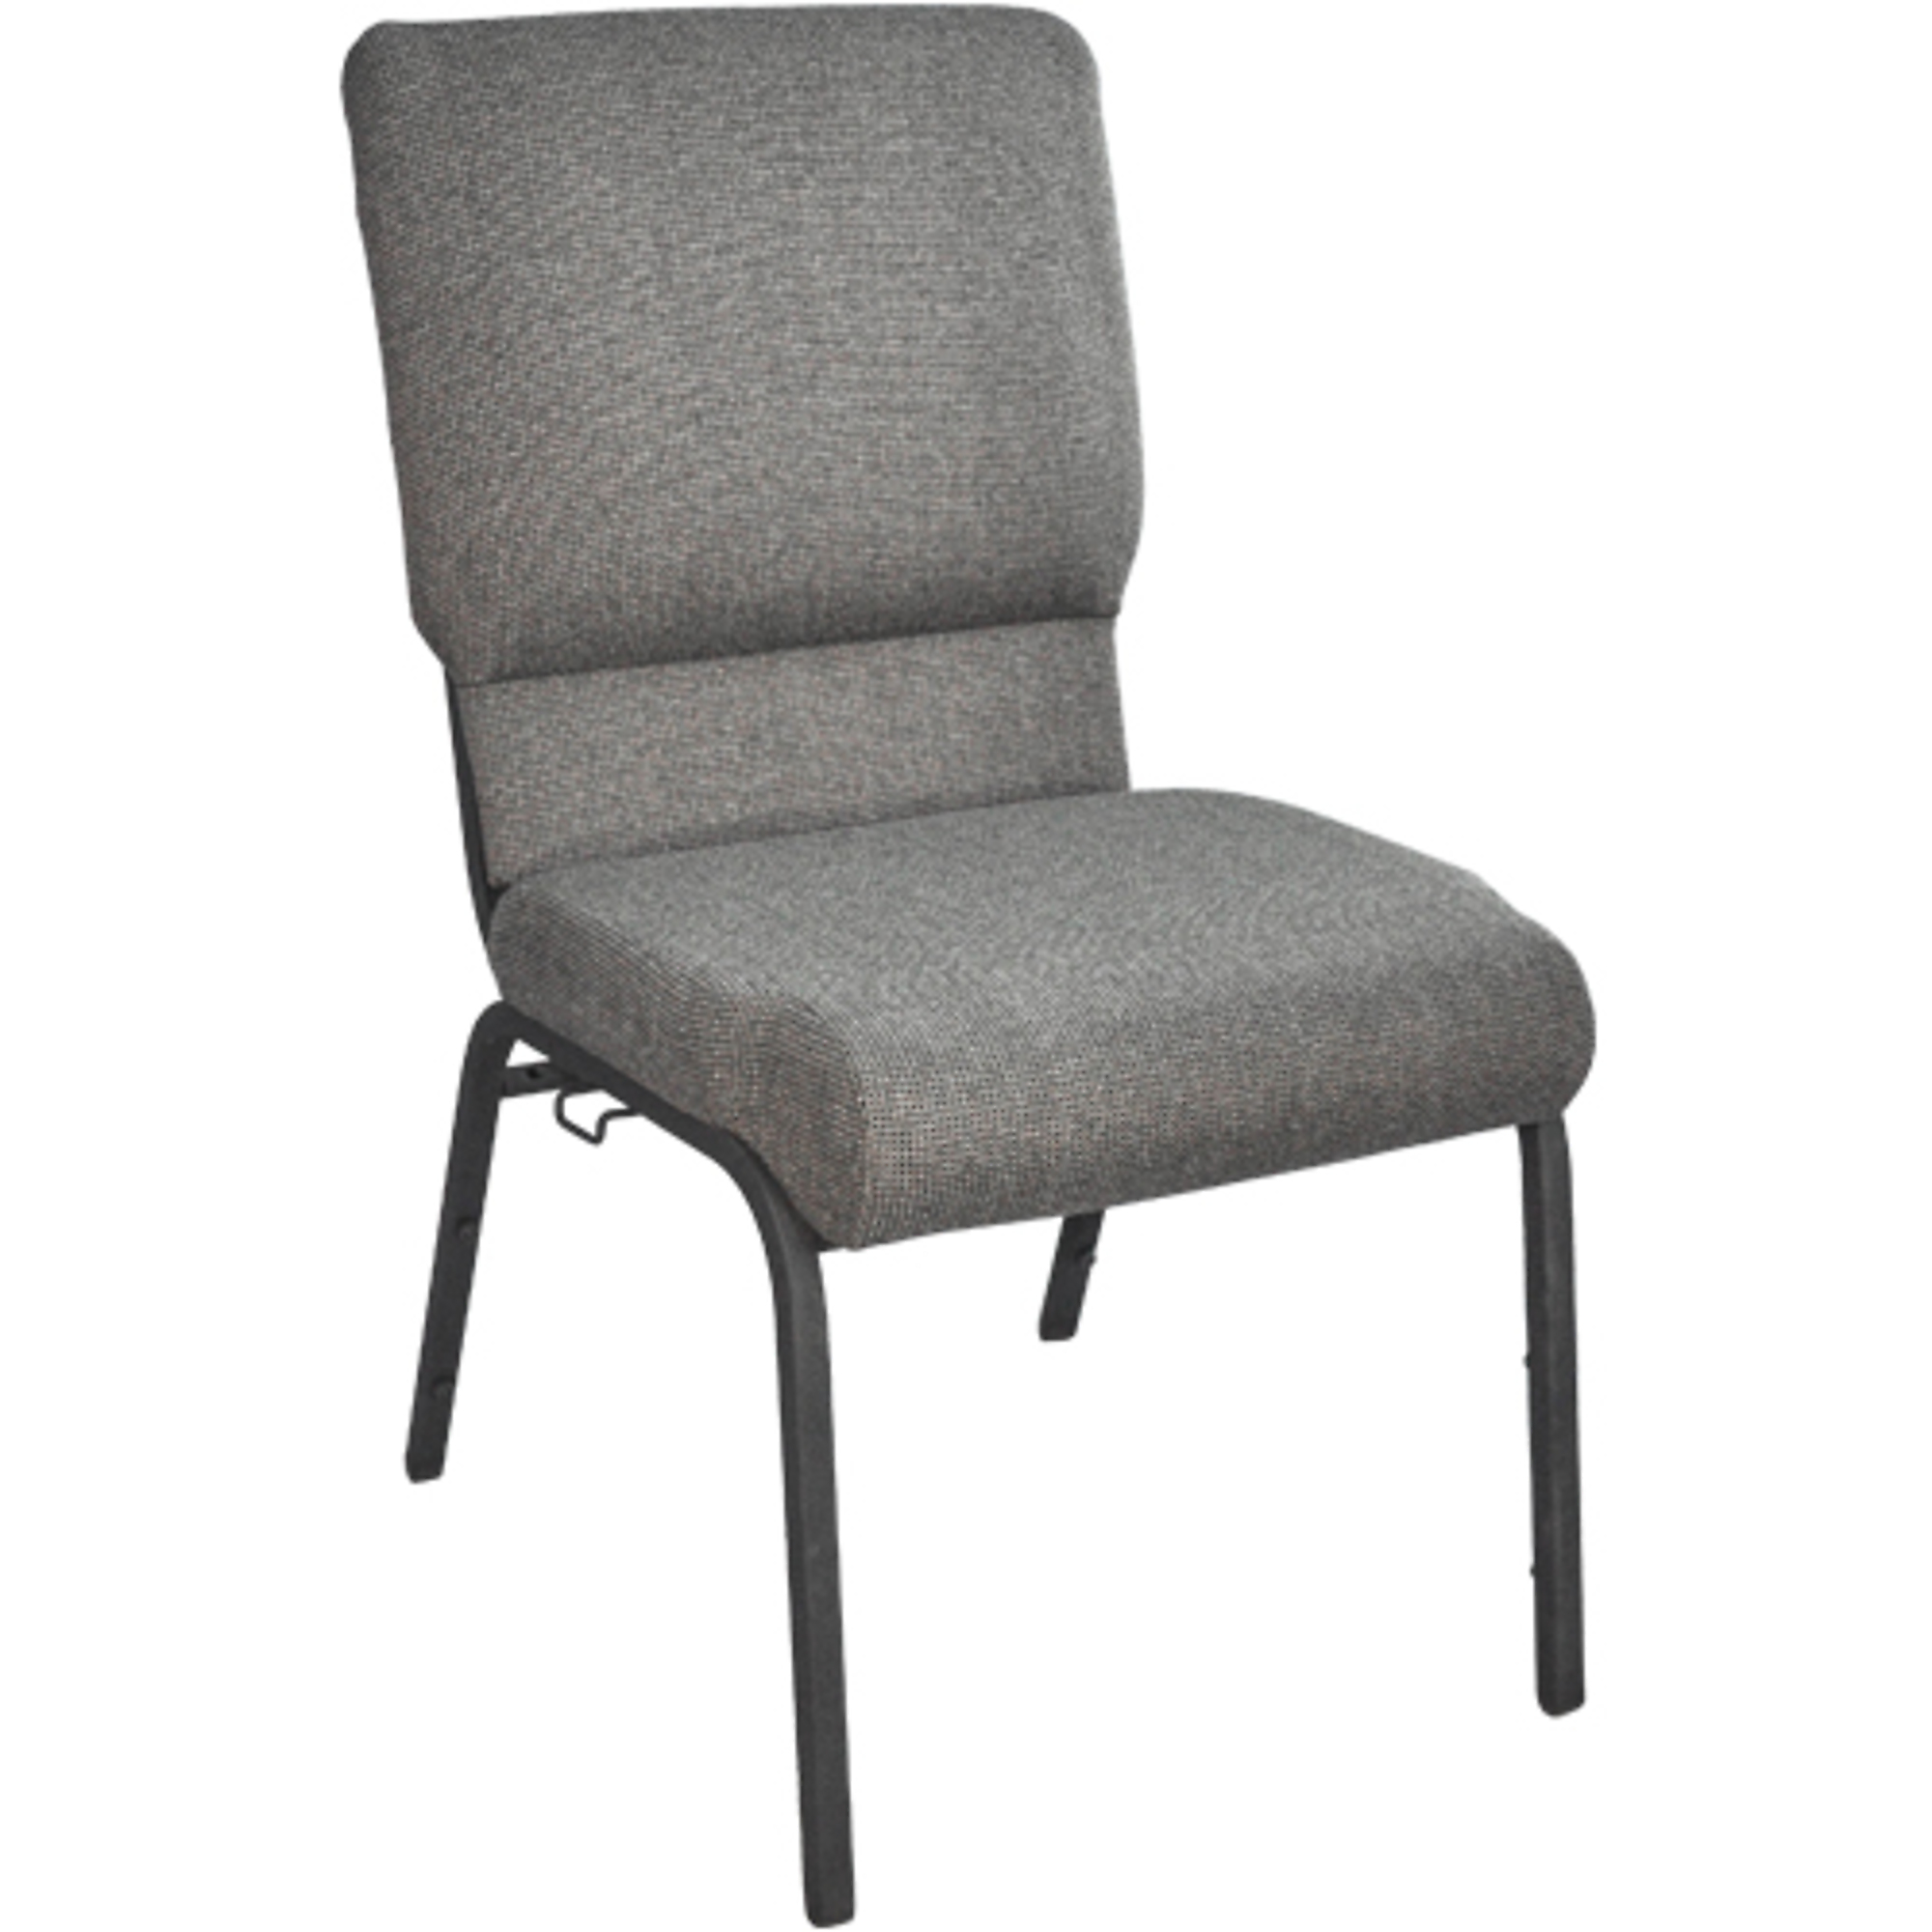 Flash Furniture, Fossil Church Chair 18.5Inch Wide, Primary Color Gray, Included (qty.) 1, Model PCHT185113